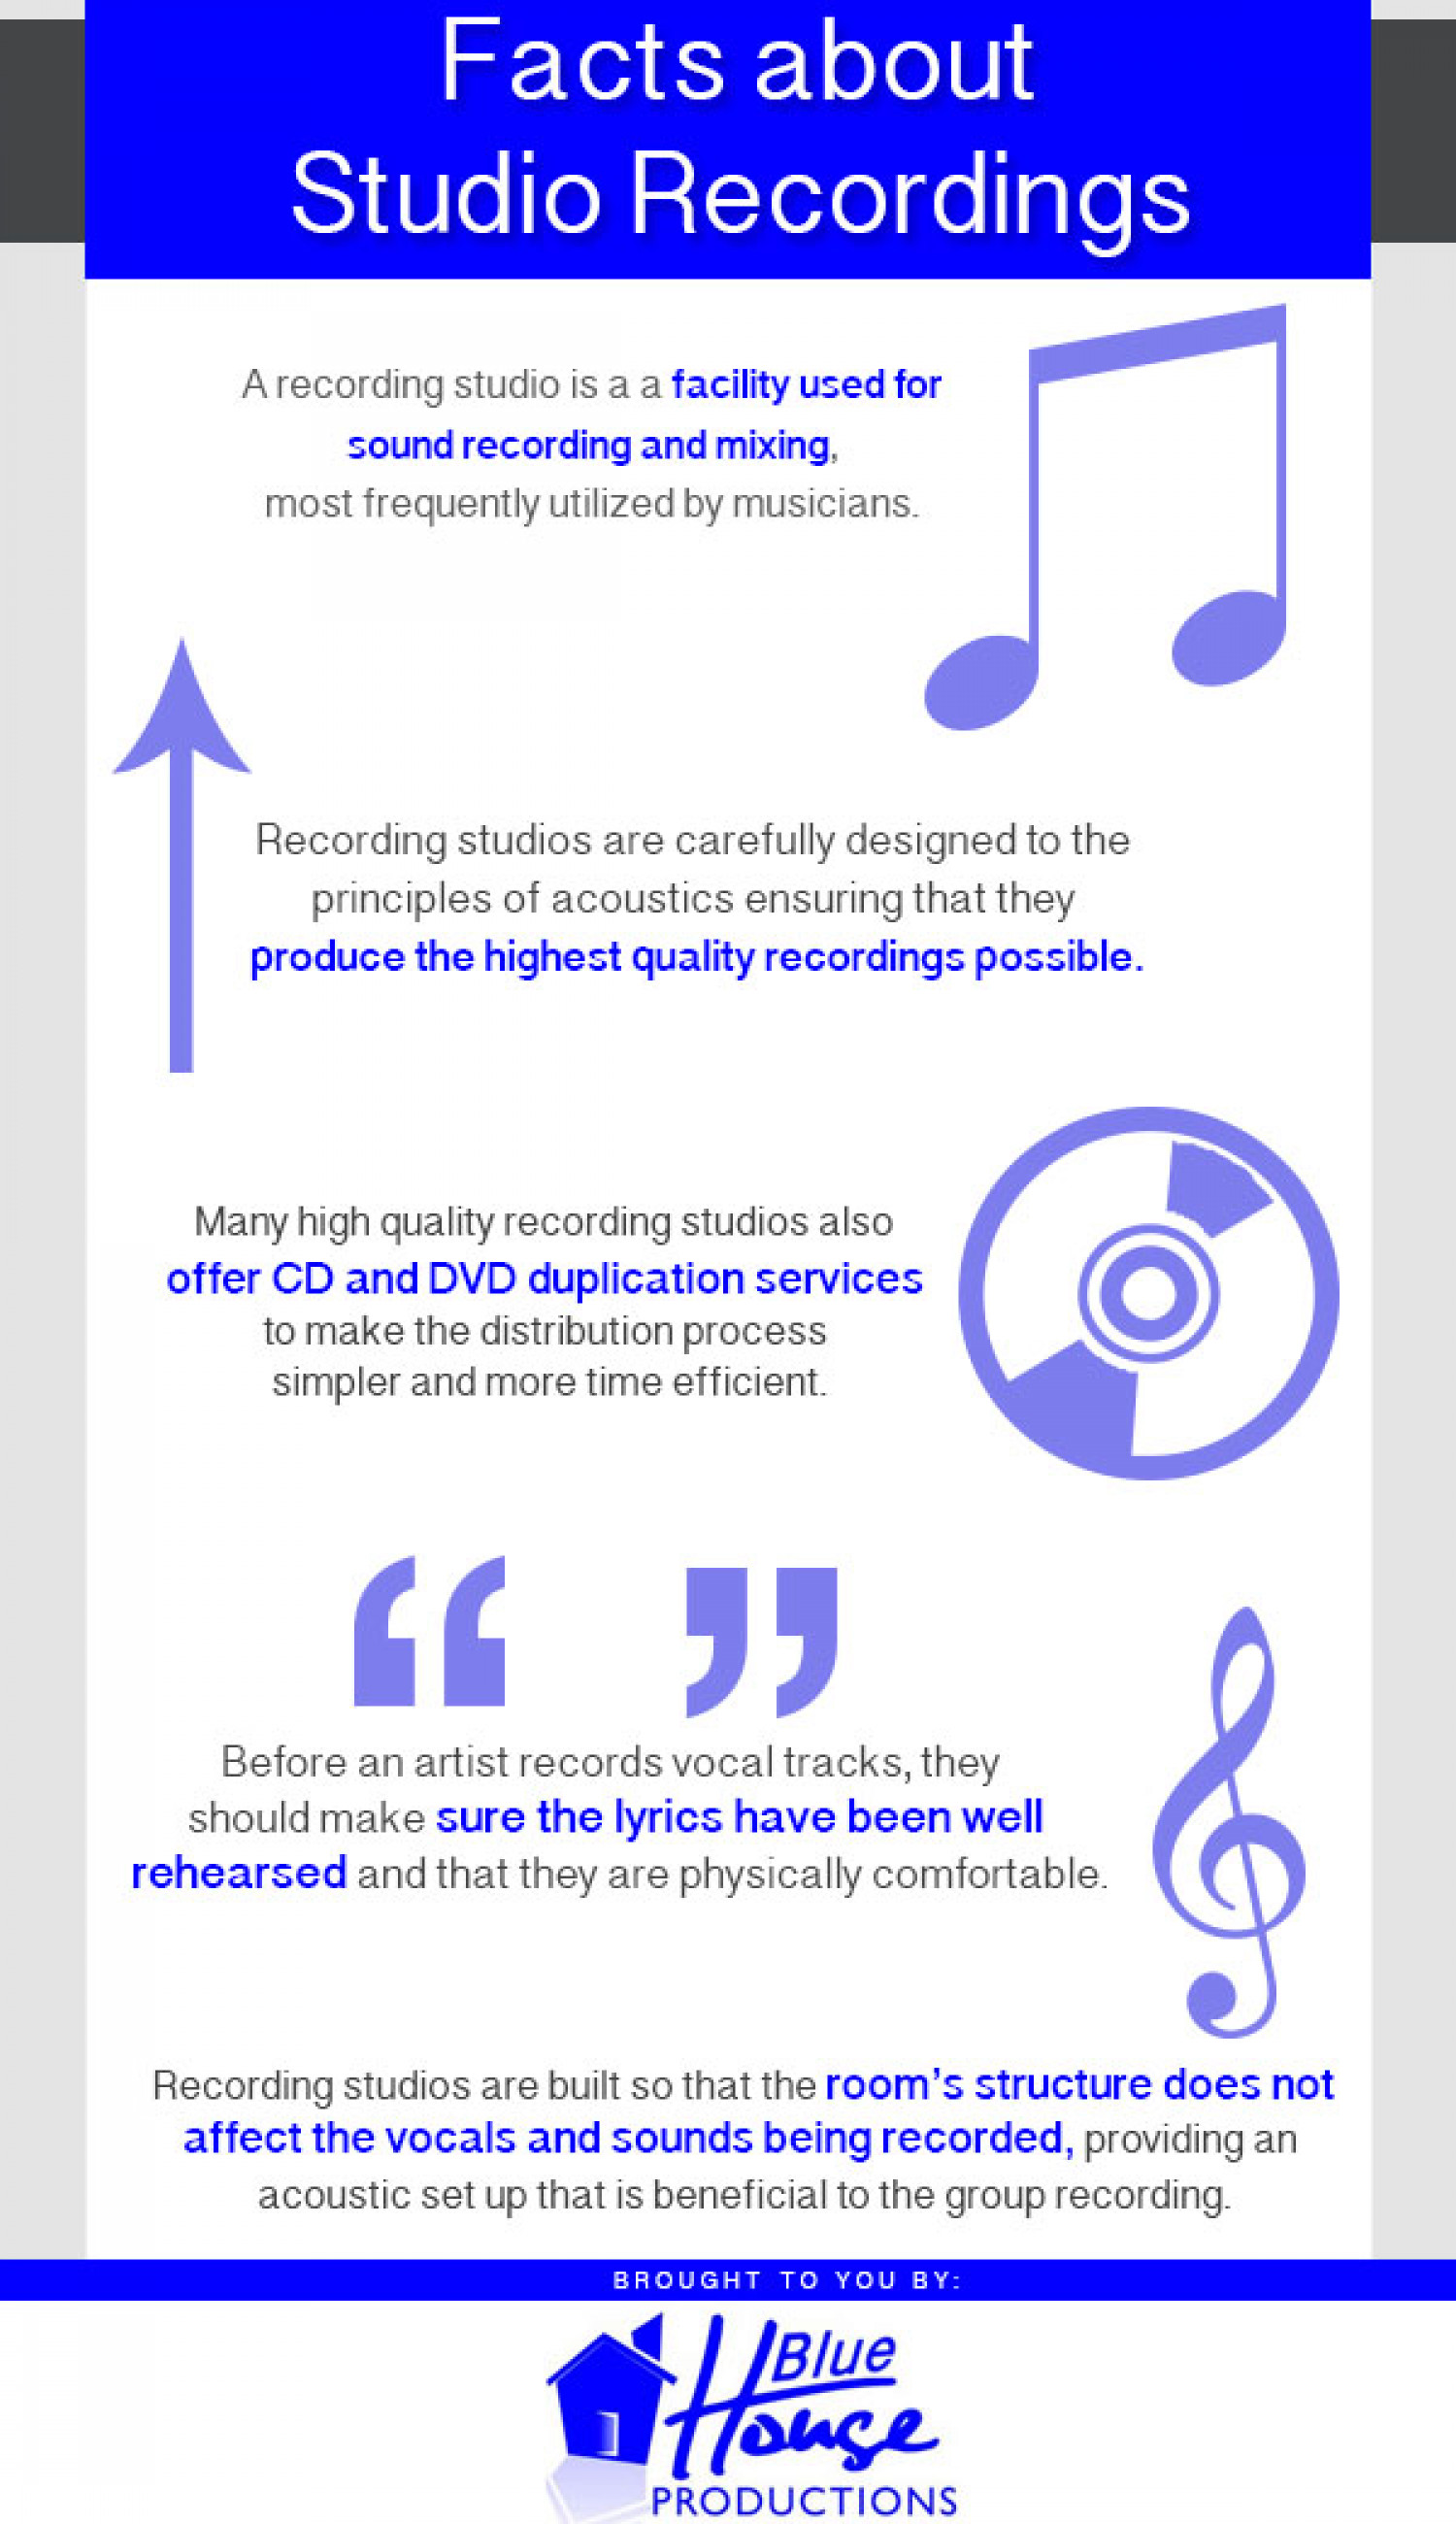 Facts about Studio Recordings Infographic